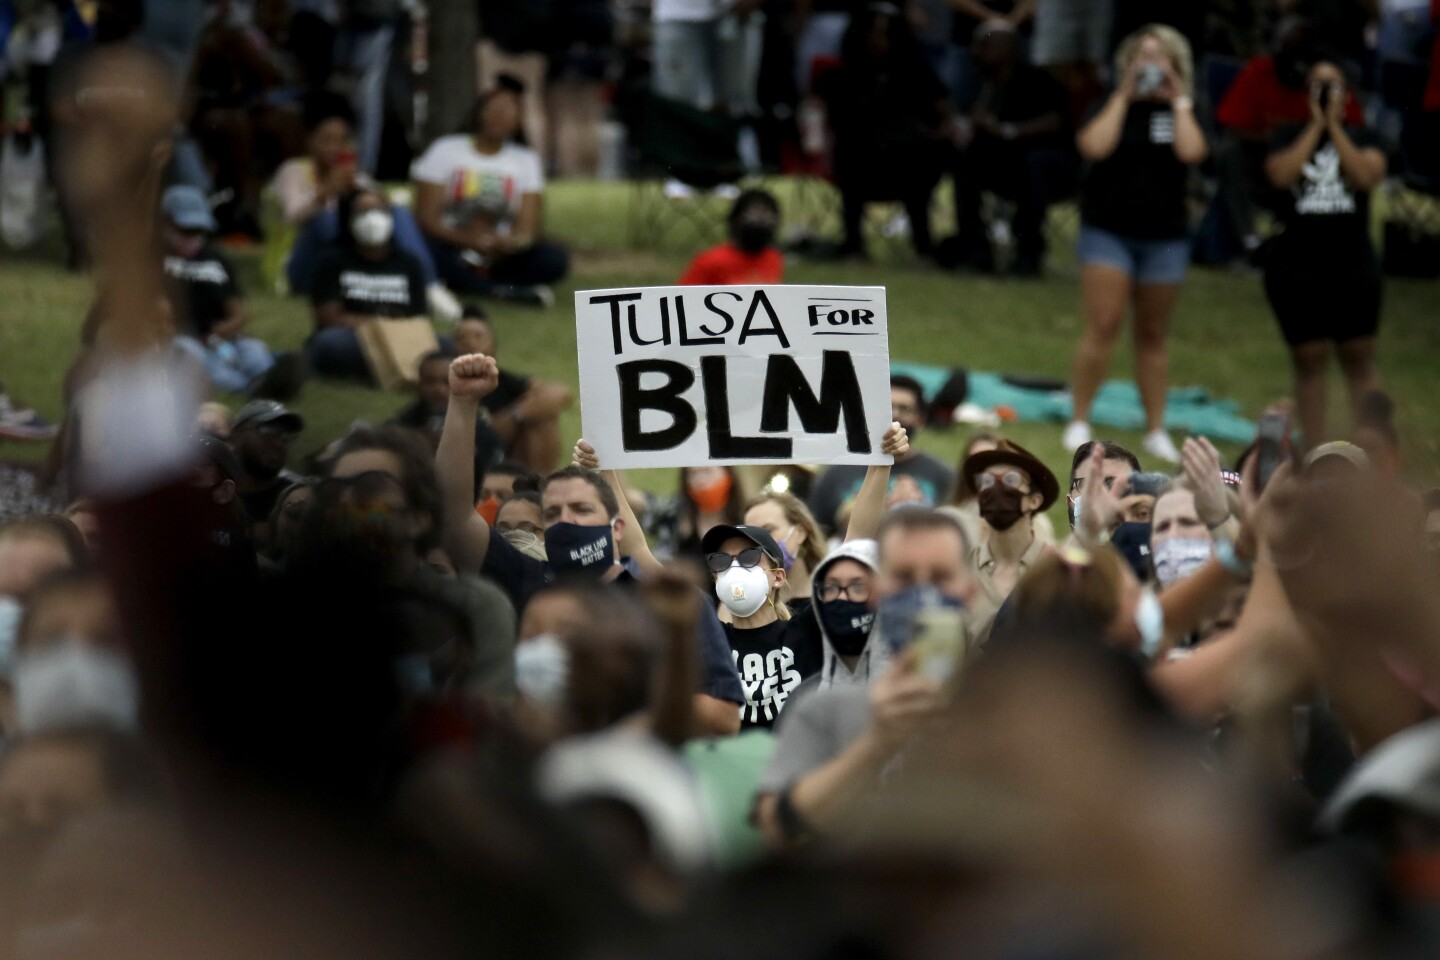 A woman holds up a sign as she listens to the Rev. Al Sharpton address the crowd at a Juneteenth rally in Tulsa, Okla., Friday, June 19, 2020. Juneteenth marks the day in 1865 when federal troops arrived in Galveston, Texas, to take control of the state and ensure all enslaved people be freed, more than two years after the Emancipation Proclamation. (AP Photo/Charlie Riedel)